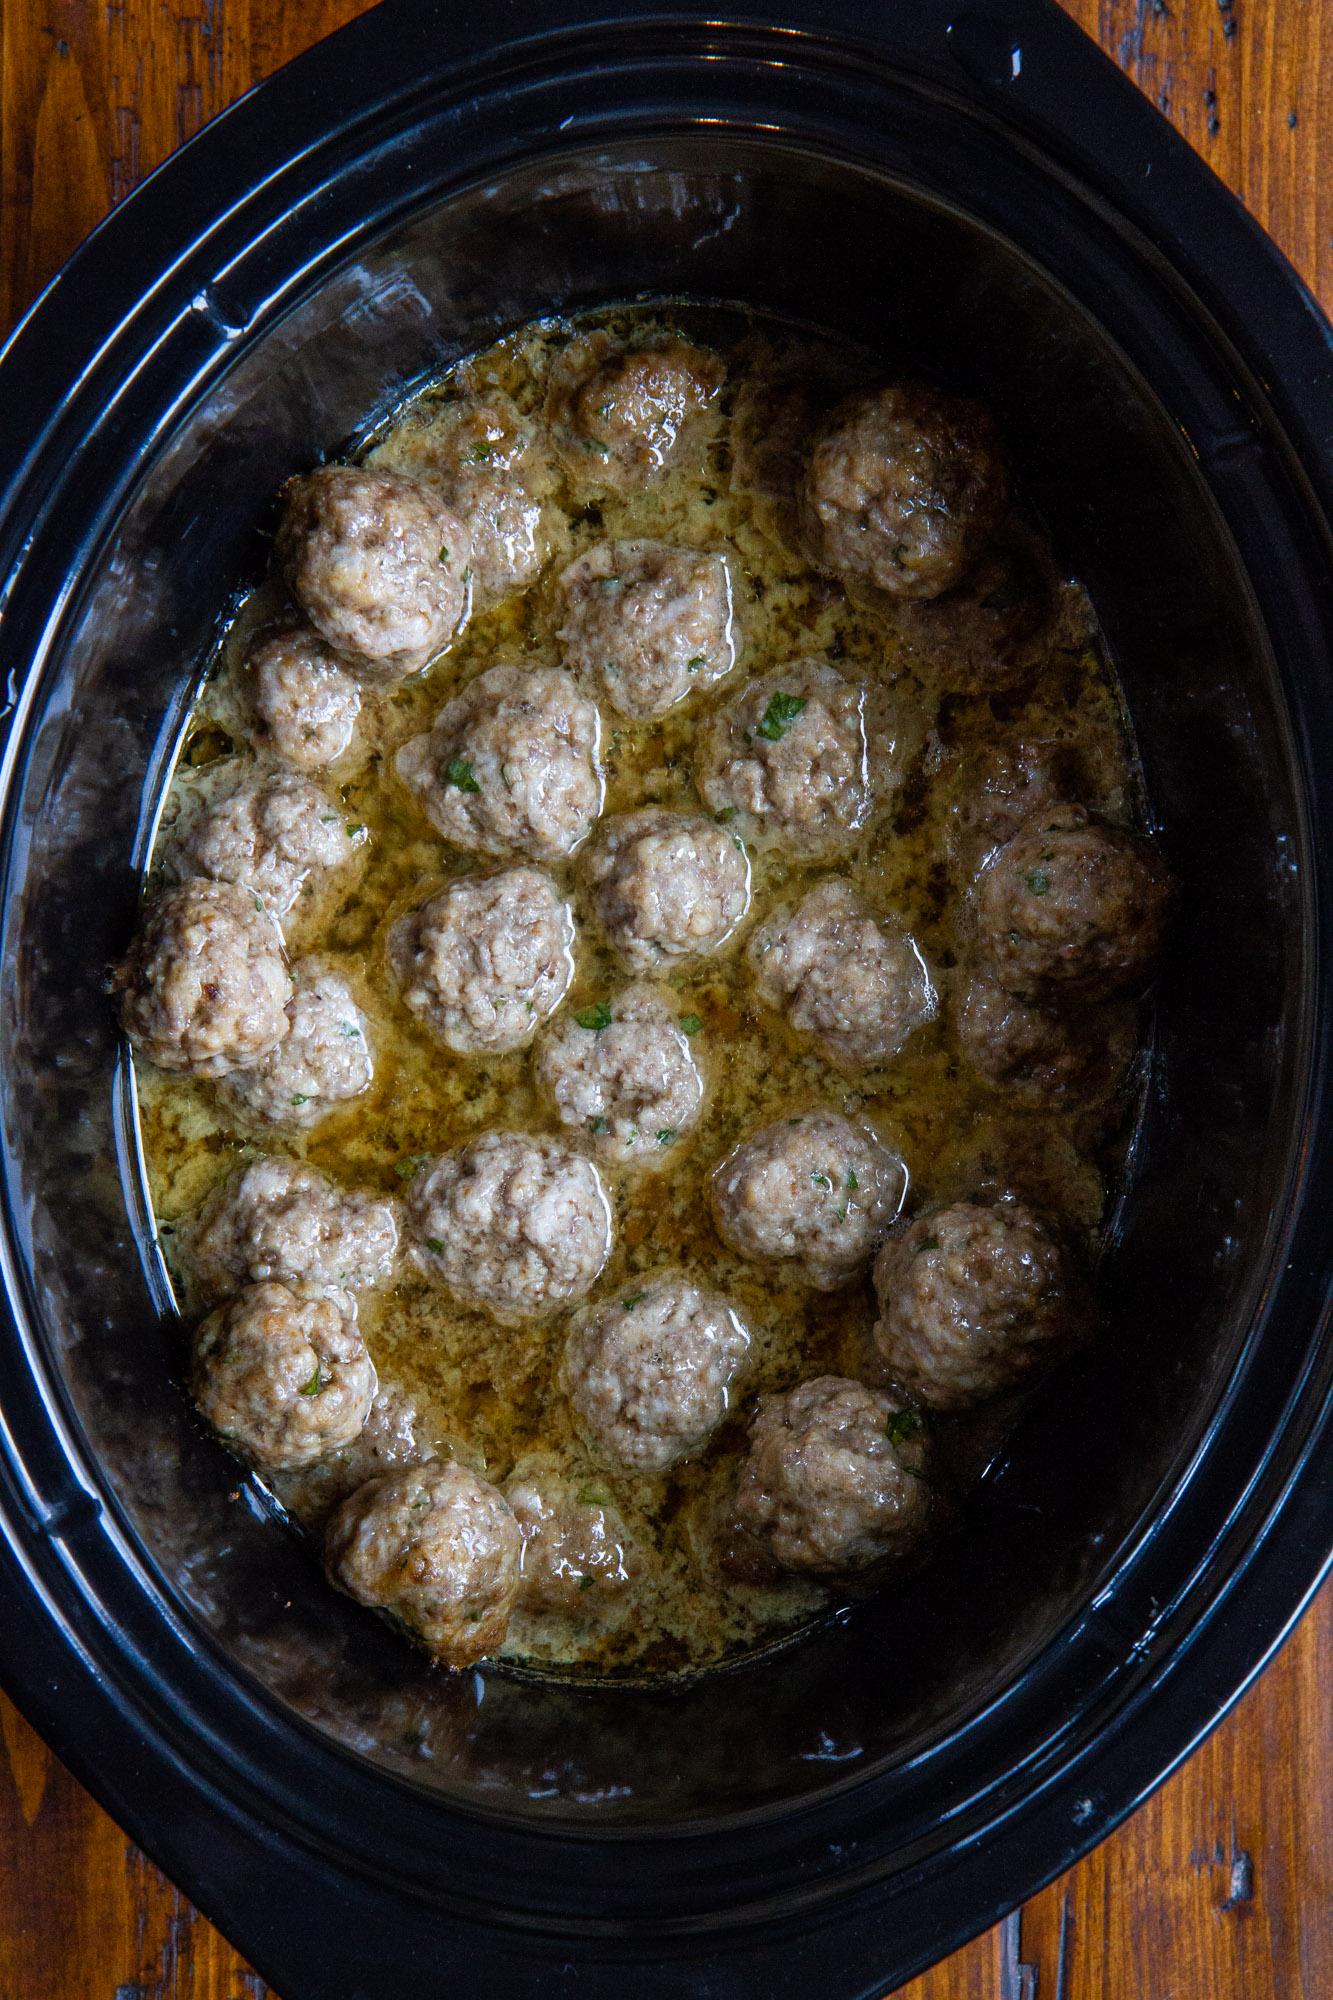 Crockpot Swedish Meatballs -- make this easy slow cooker meatballs recipe for a quick, family-friendly dinner. Everything is made in the crockpot -- even the gravy! @girlversusdough #girlversusdough #slowcooker #crockpotmeal #easydinnerrecipe #easyappetizer